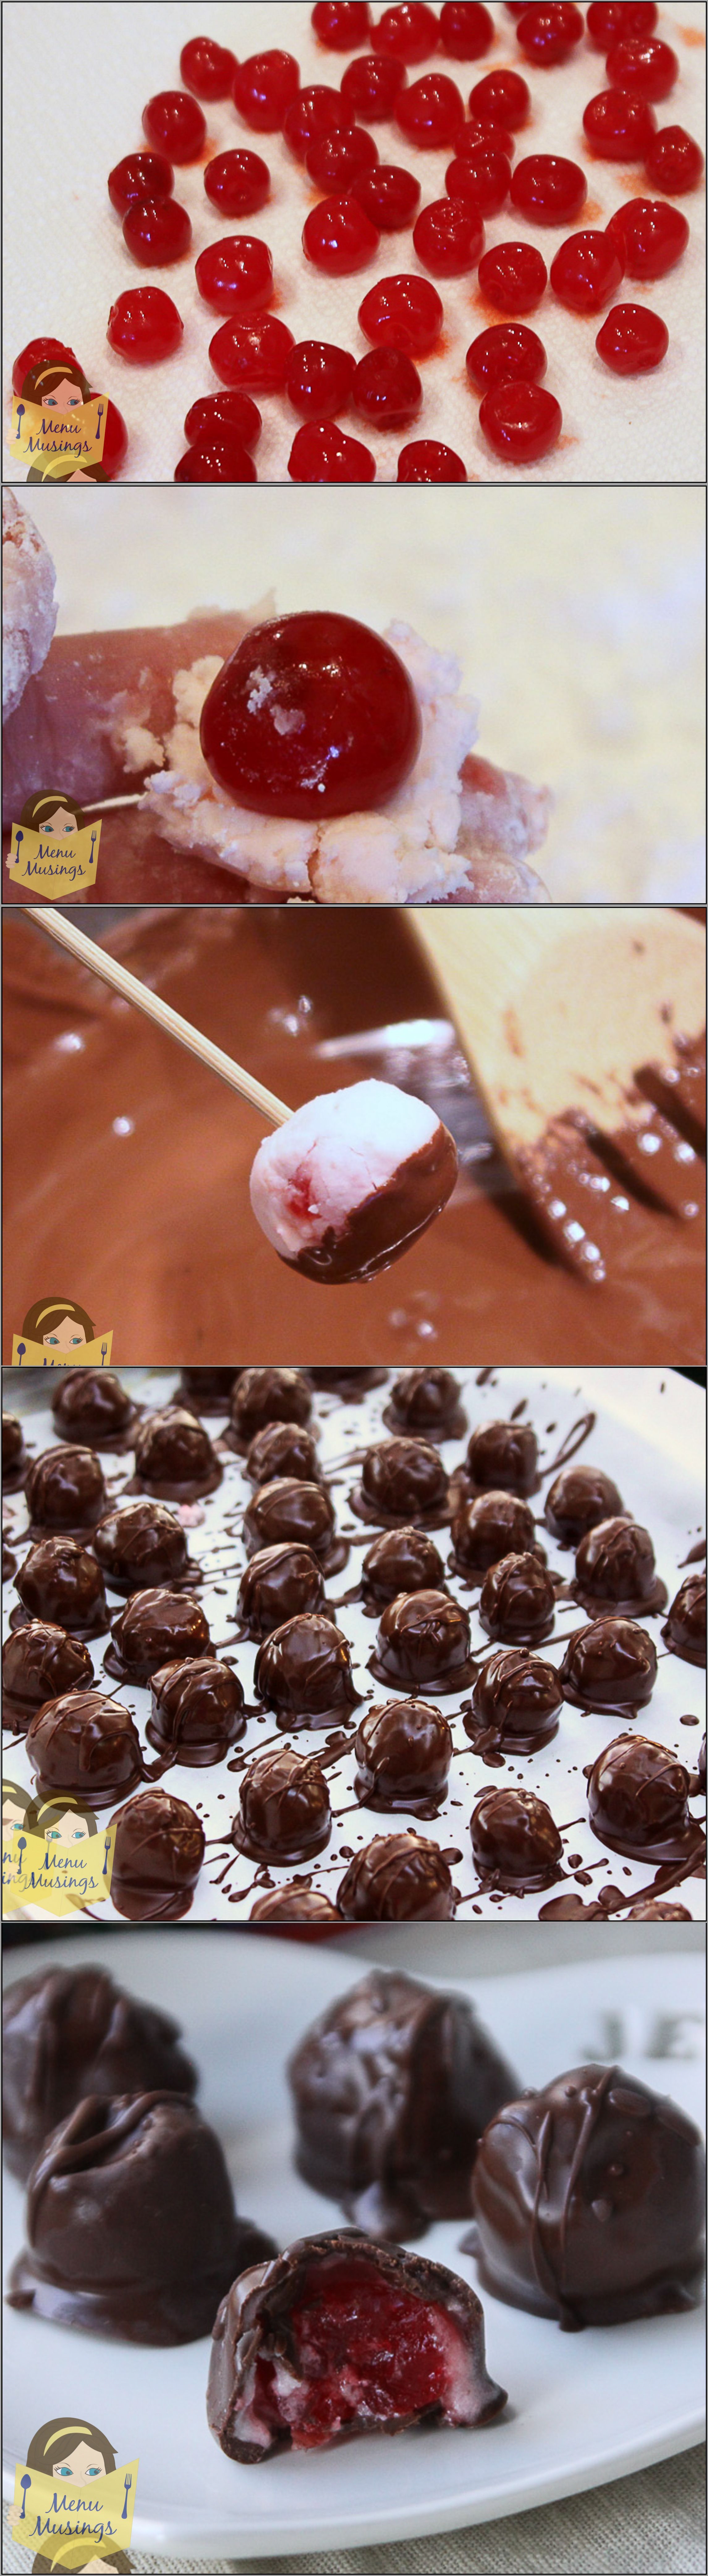 Chocolate Covered Cherries! ♥ Step-by-step tutorial to creating these gorgeous candies that are far better than store bought.  A